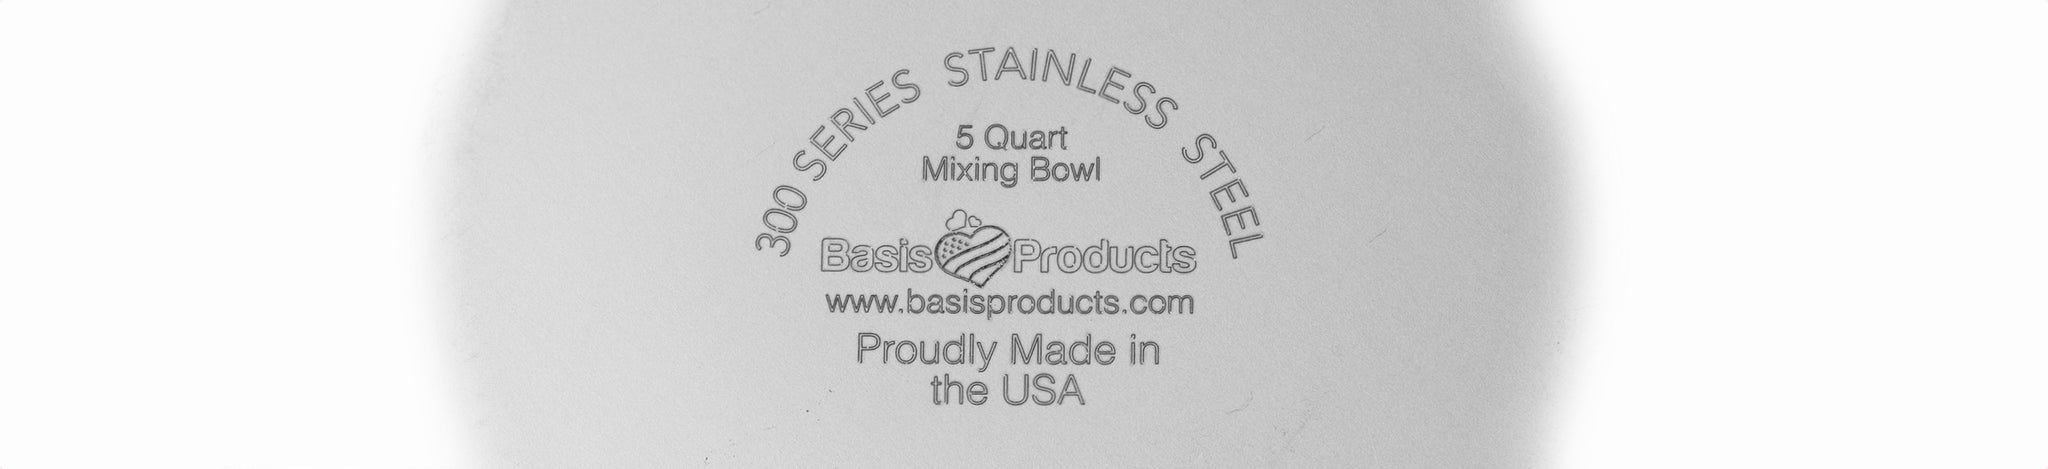 Underside of 5 quart mixing bowl laser mark which shows the Basis Products logo, website URL, and the text "300 Series Stainless Steel" and "Proudly Made in the USA".